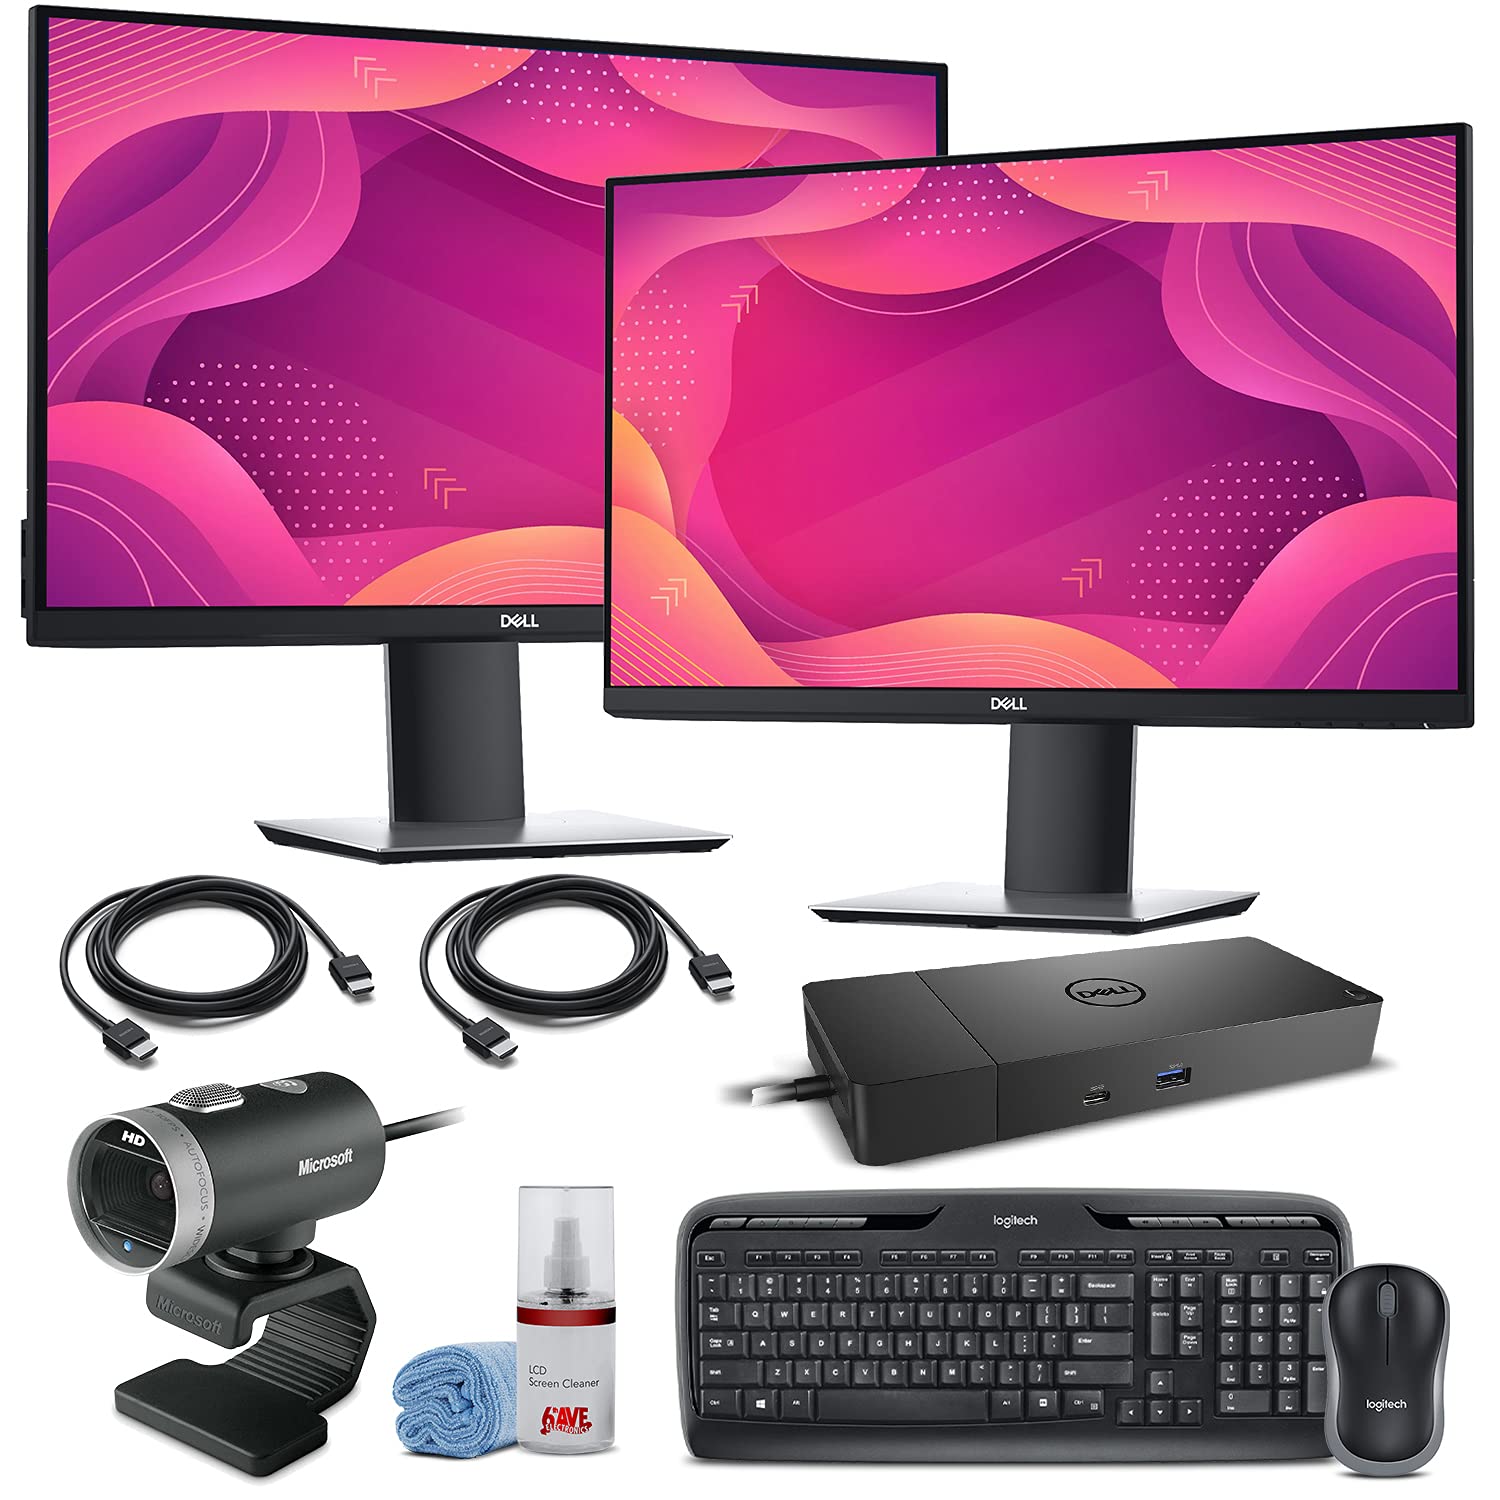 2 x Dell P2419HC 23.8" 16:9 IPS Monitor (P2419HCE) + WD19S USB Type-C Dock (180W) + LifeCam Cinema Webcam + Keyboard and Mouse + 2 x HDMI Cable...